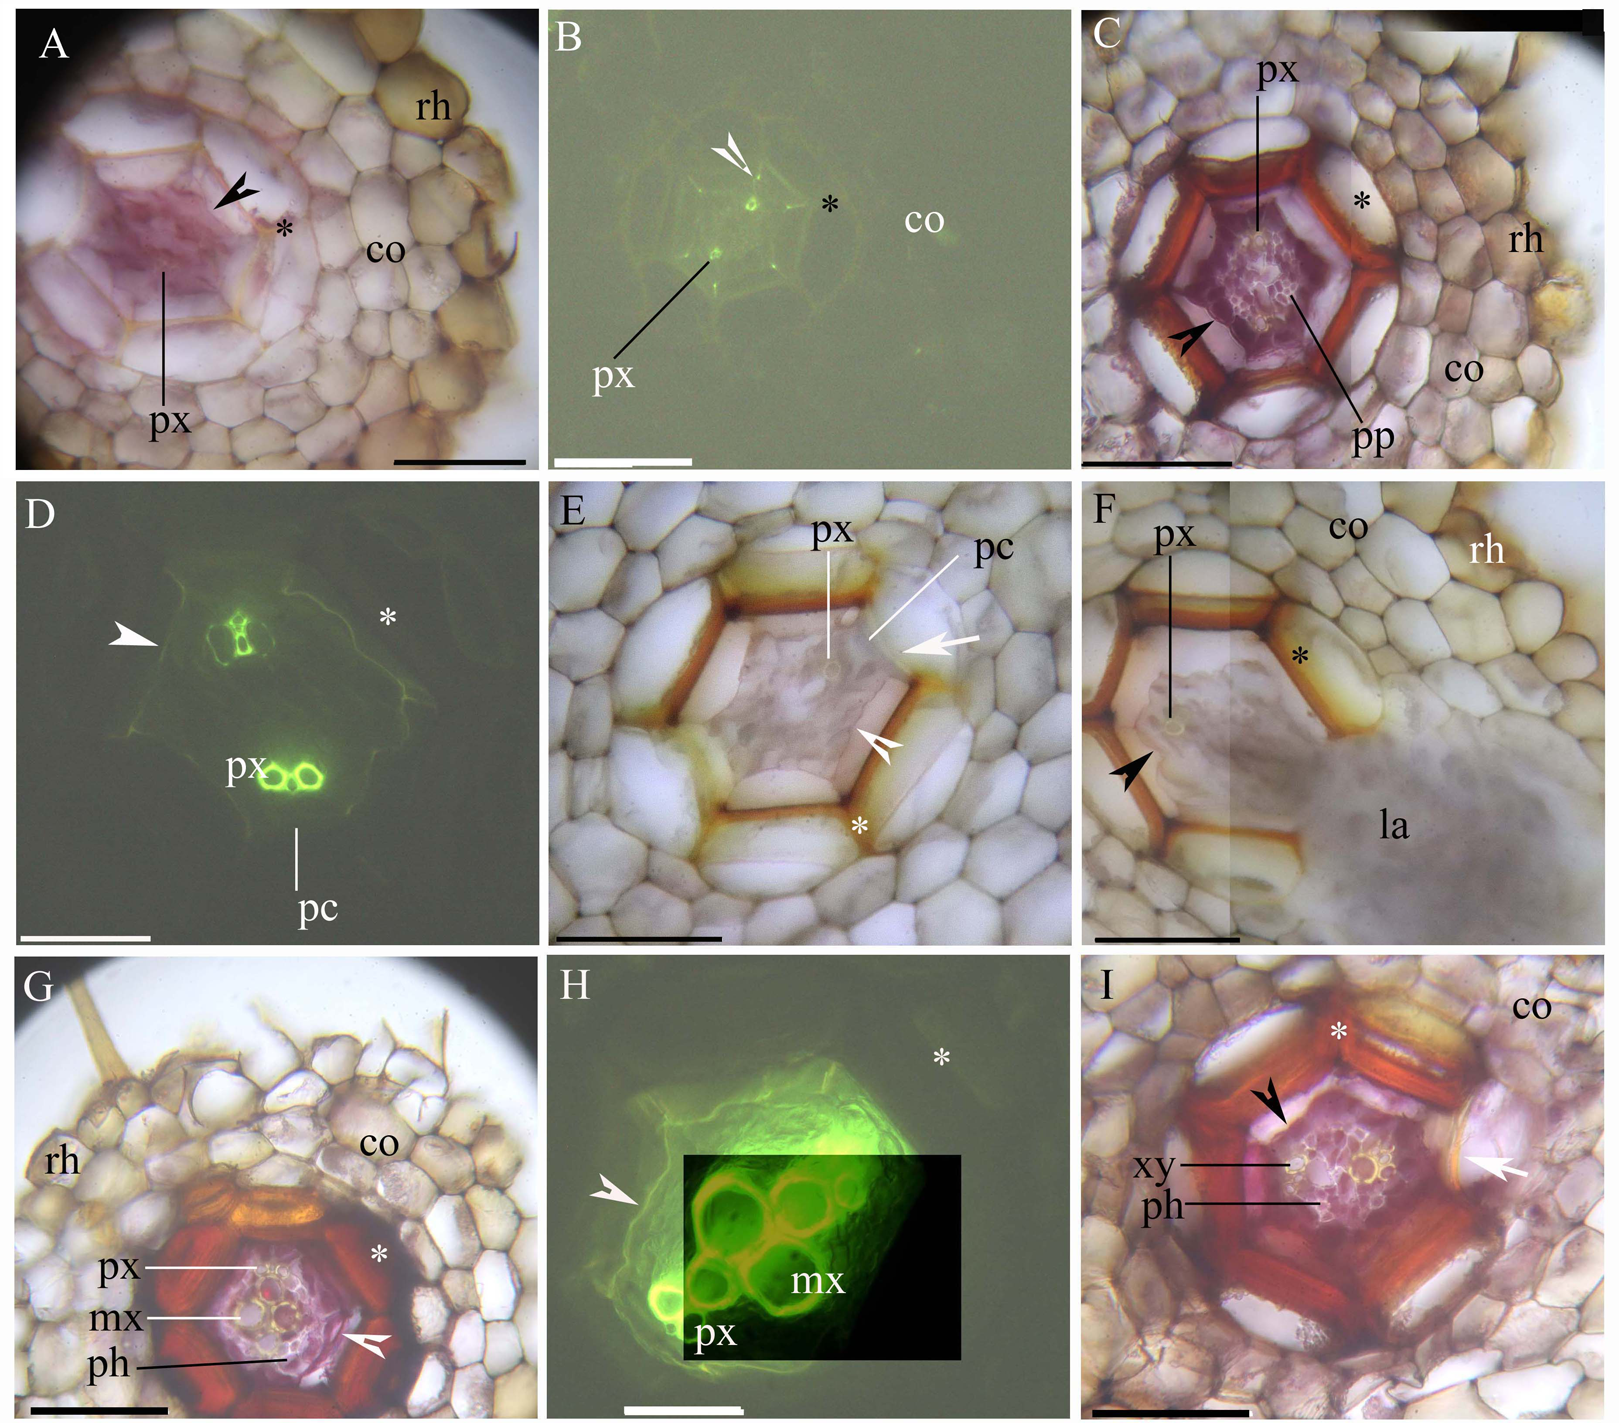 PDF) Micro-morphological characters in Polypodiaceae and its taxonomic  significance